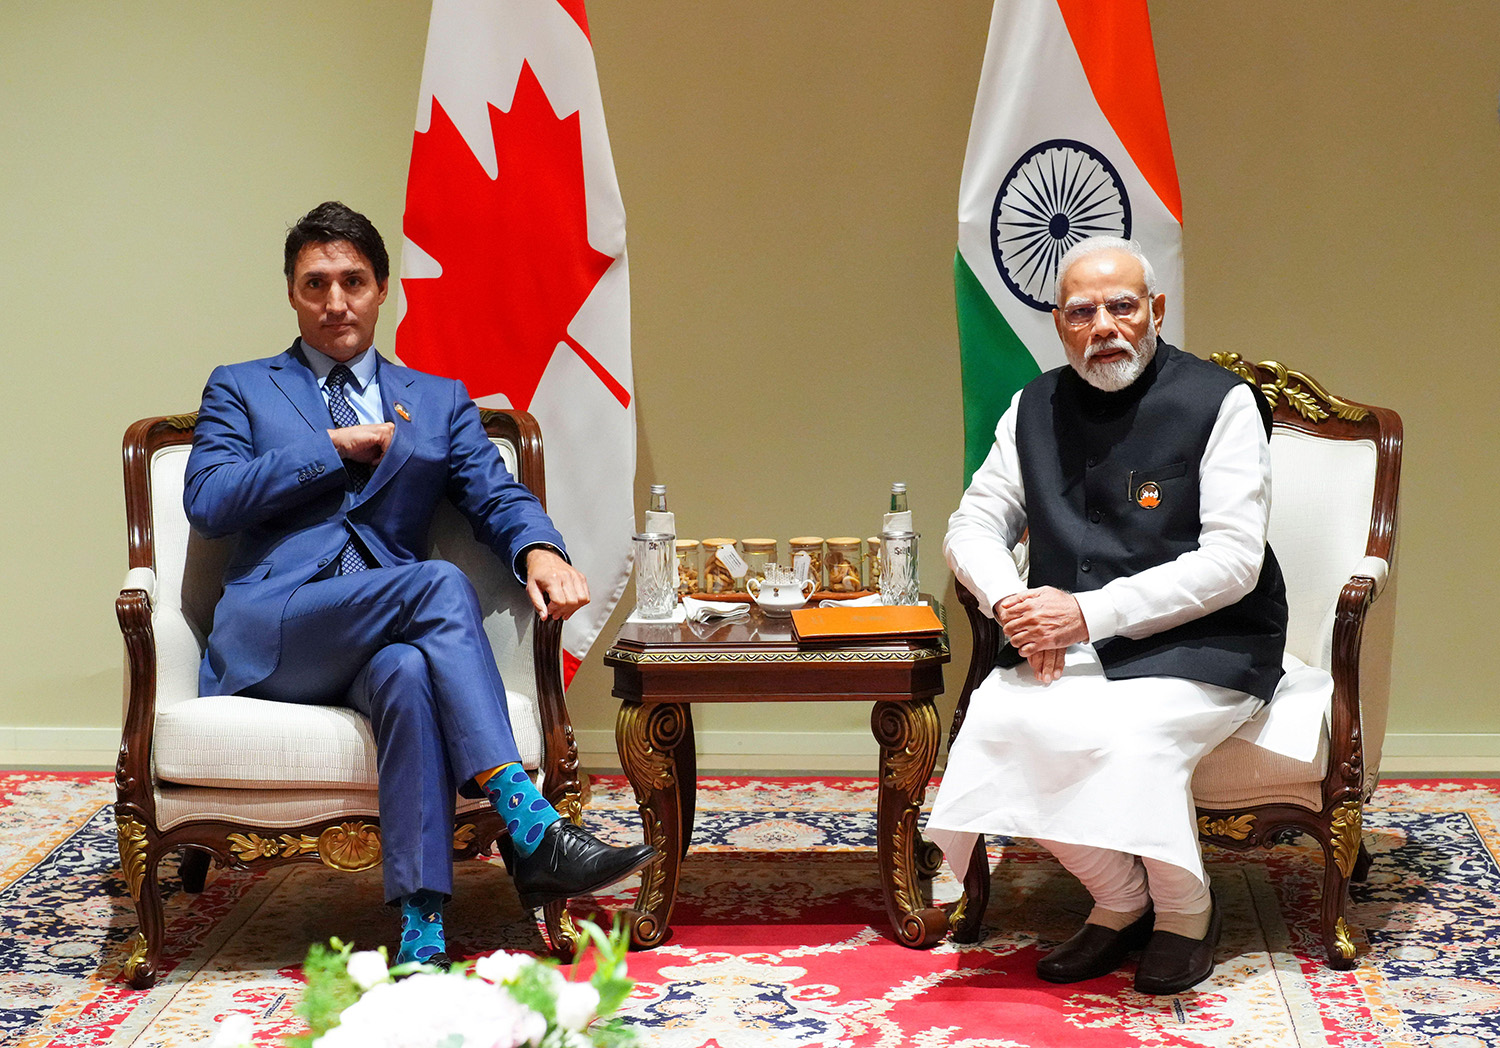 Modi unmasked amid rising tensions between India and Canada